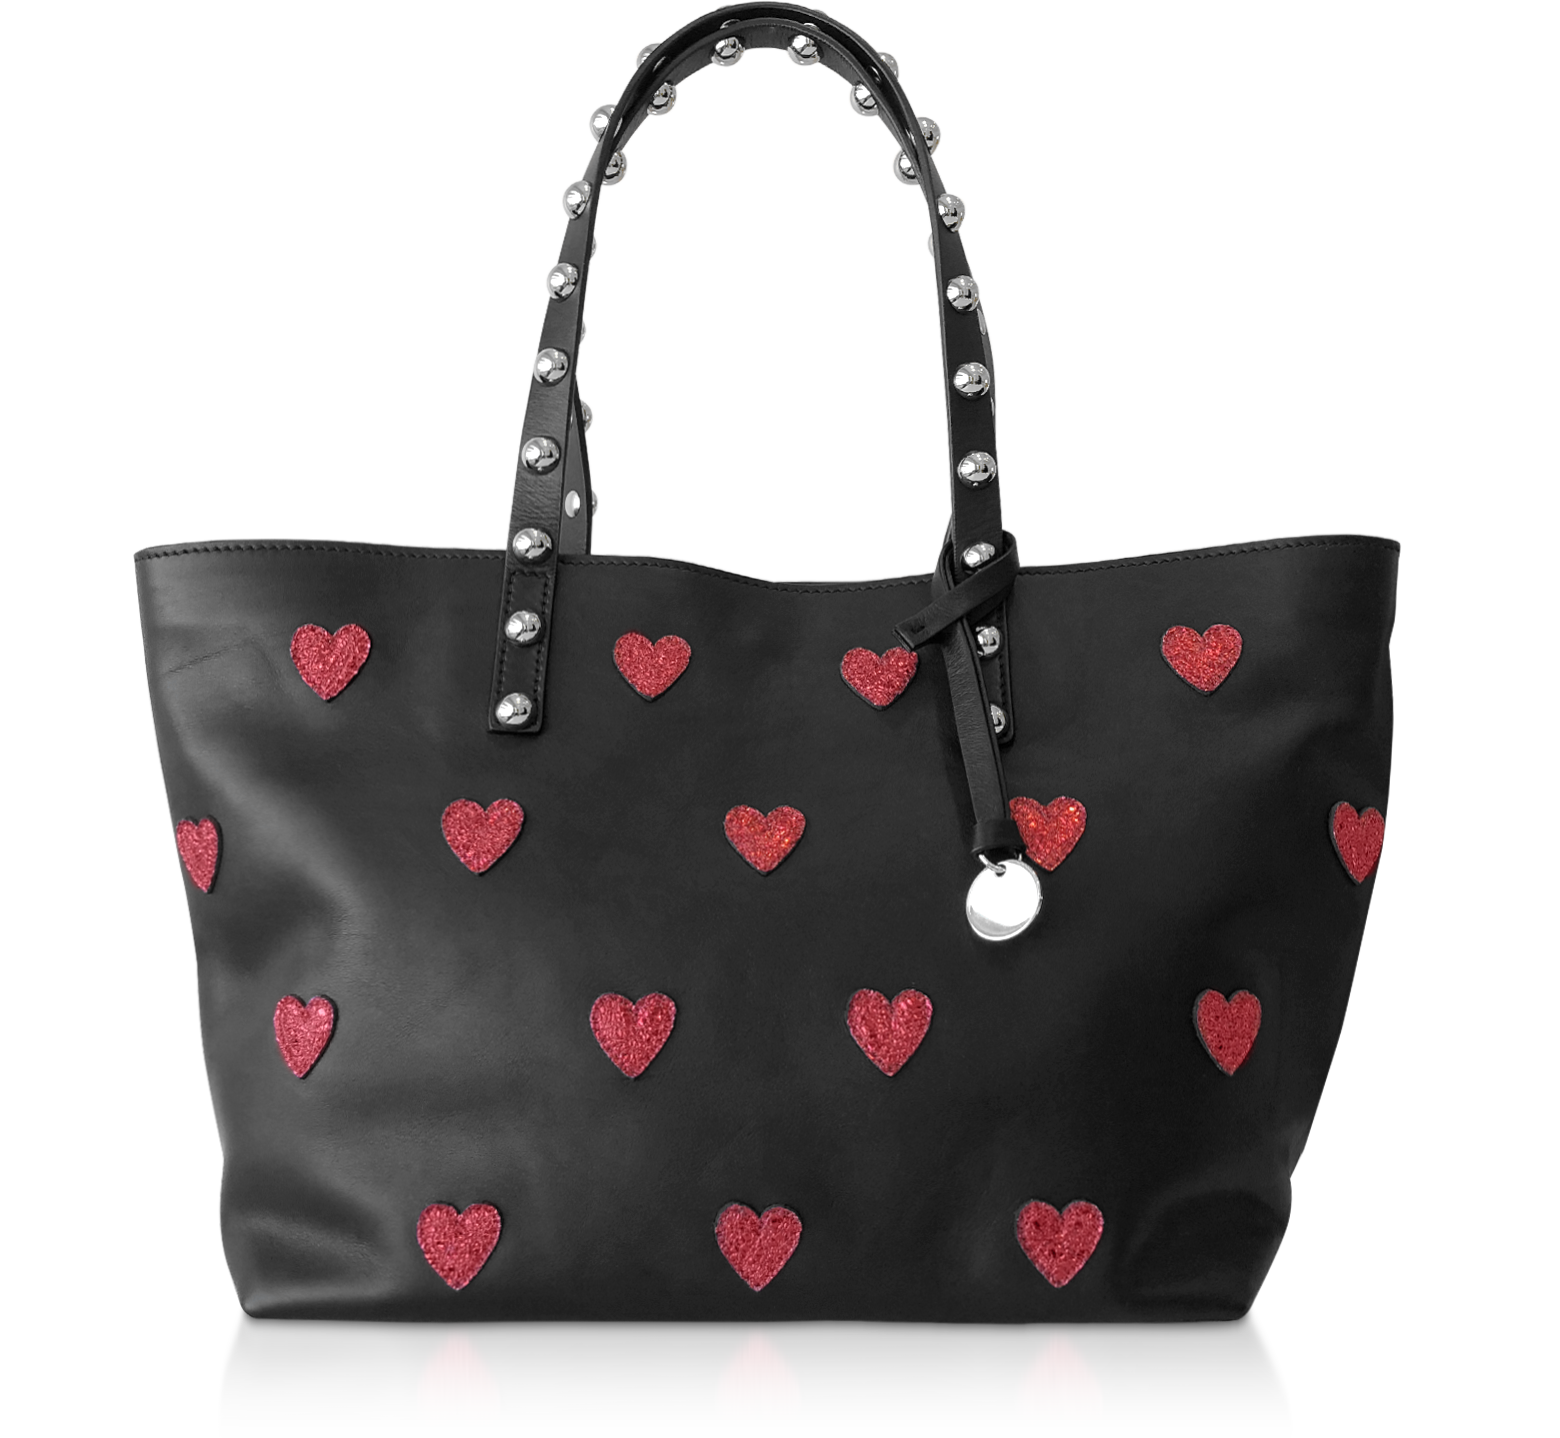 RED Valentino Red Heart Printed Leather Tote Bag at FORZIERI